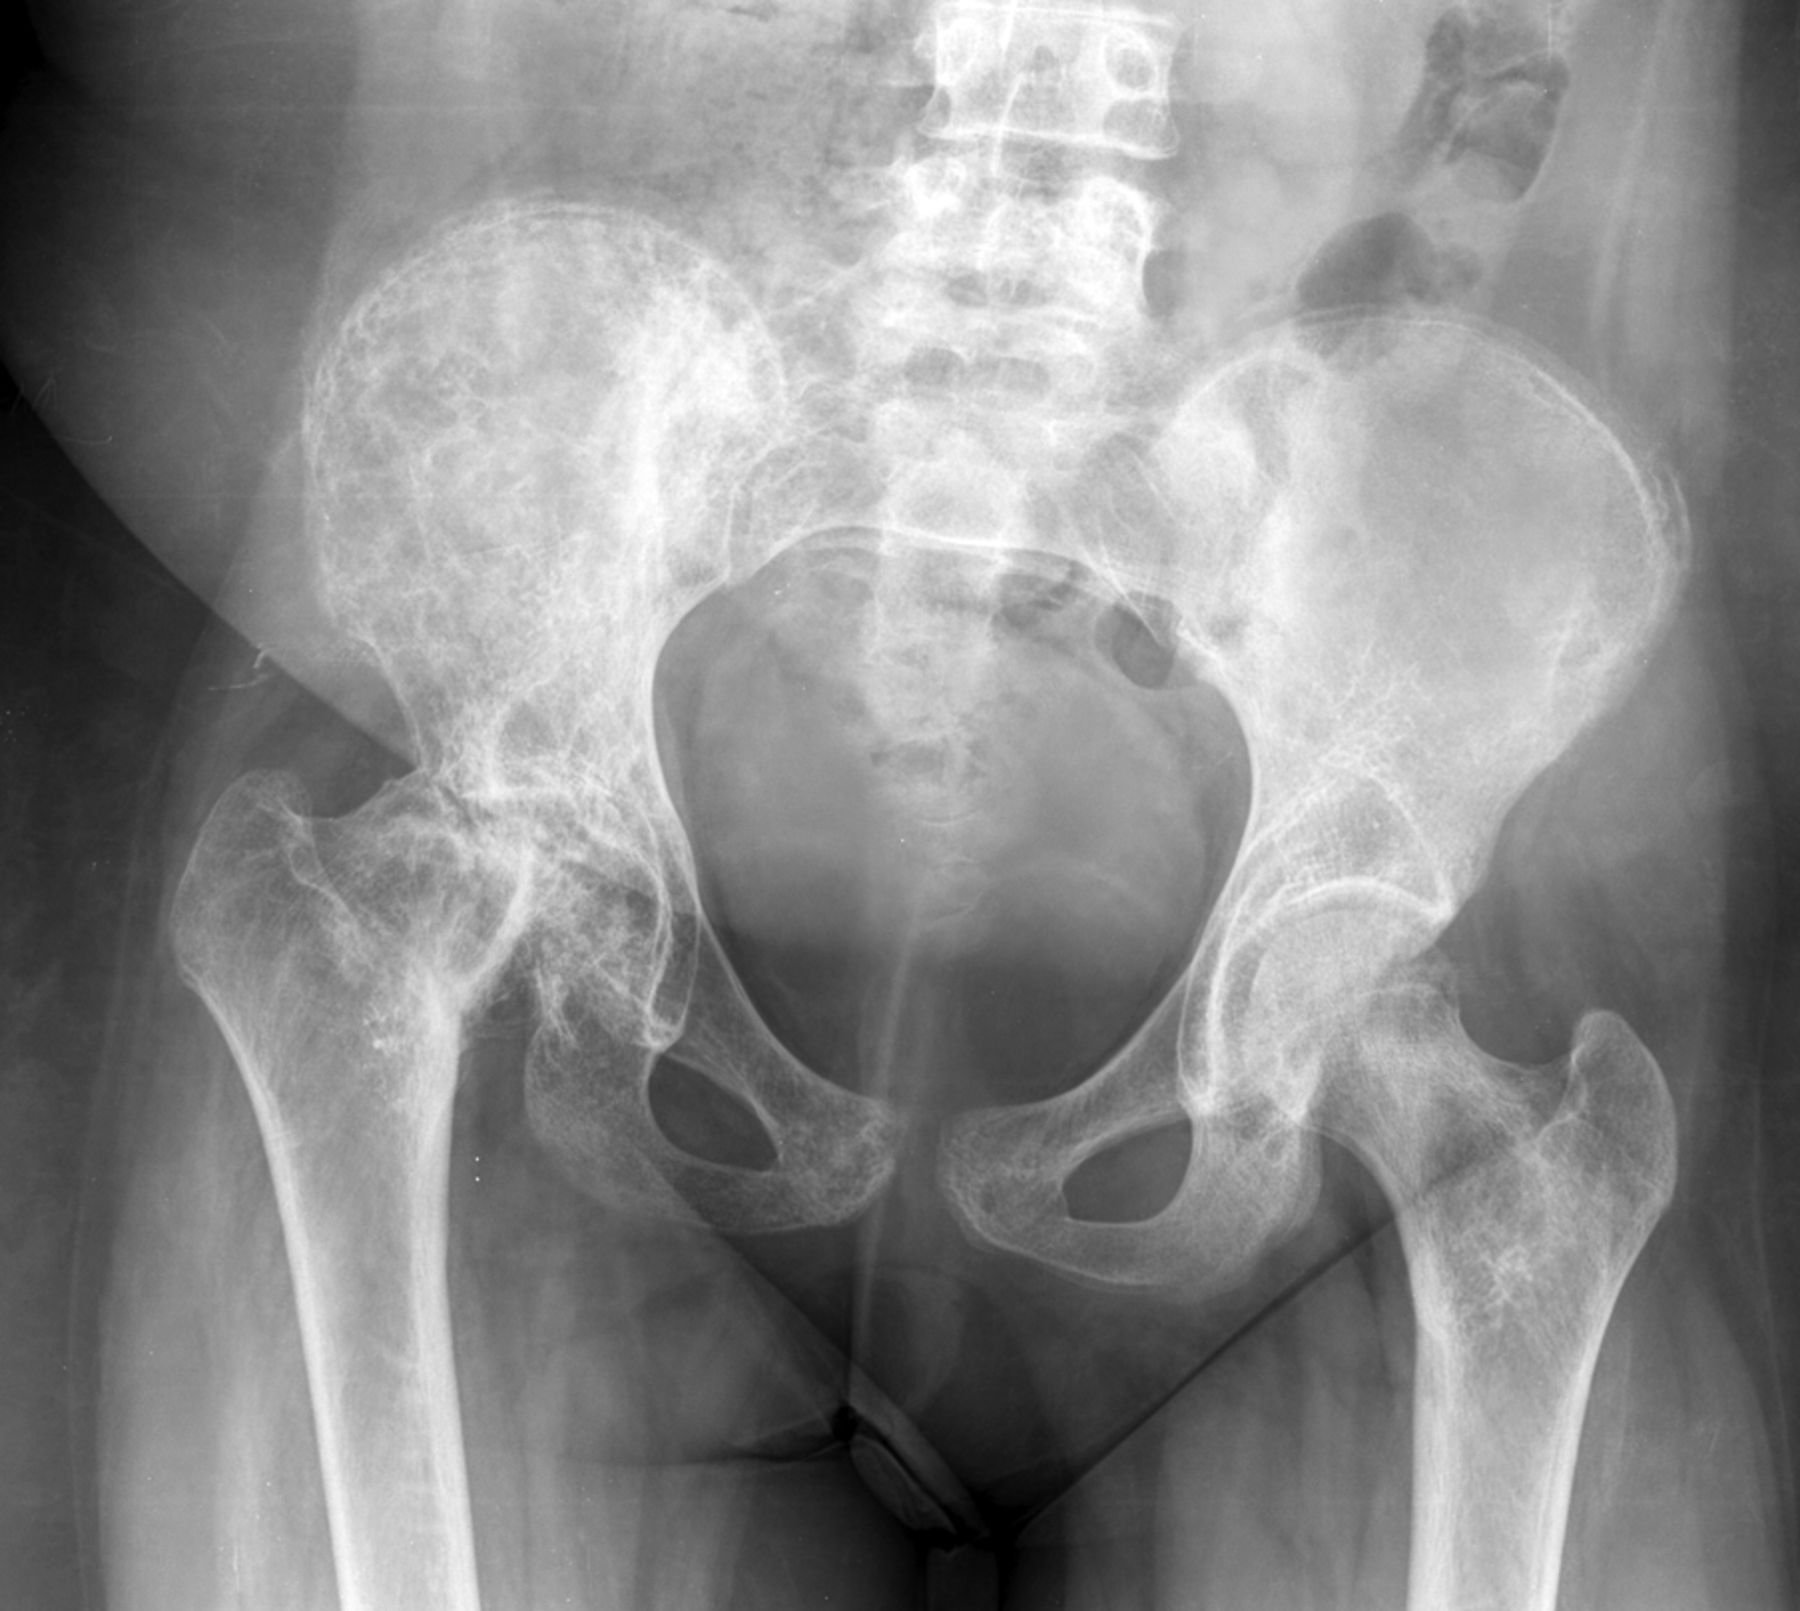 Figs. 1a - 1b 
          Anteroposterior radiographs of a
19-year-old patient showing a) a large area of radiation osteitis
in the right iliac wing and acetabulum, and avascular osteonecrosis
of the right femoral head 24 months after irradiation with 55 Gy
for a sarcoma of the gluteal region, and the same patient b) 42
months after a cemented total hip arthroplasty with a reinforcement
cross.
        